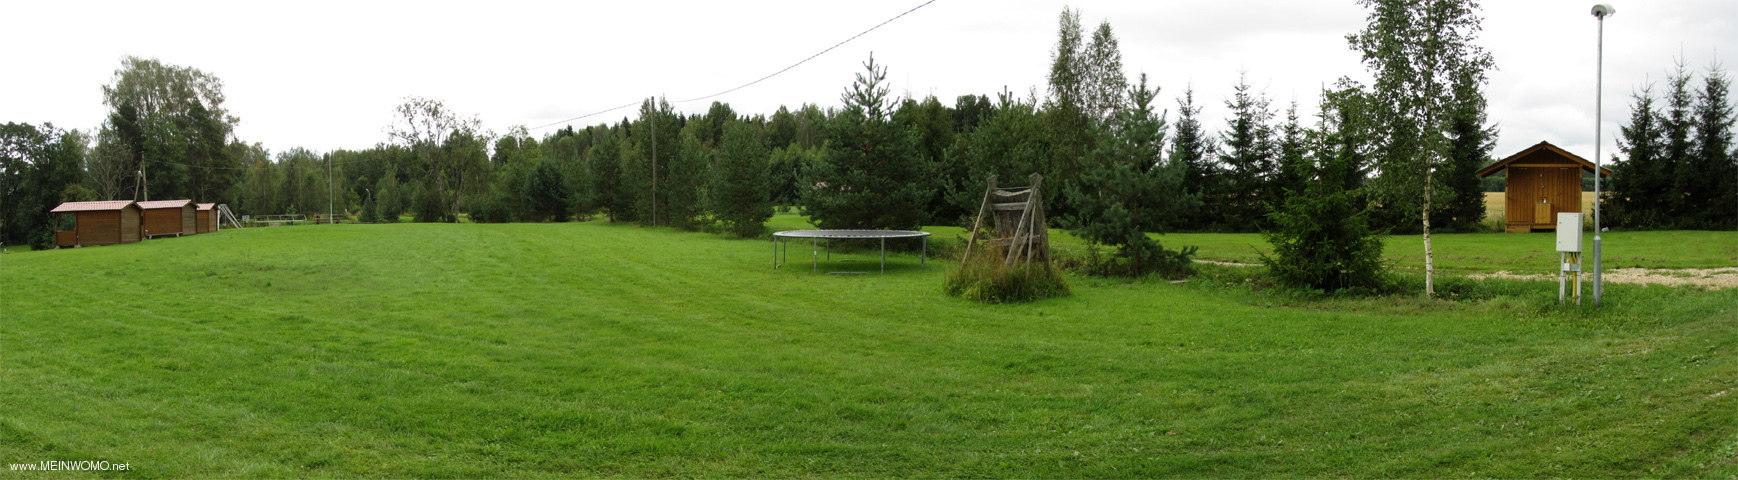  Soomaa Kanuumatka Camping - camping prairie, a laiss trois bungalows louables, juste derrire les  ...